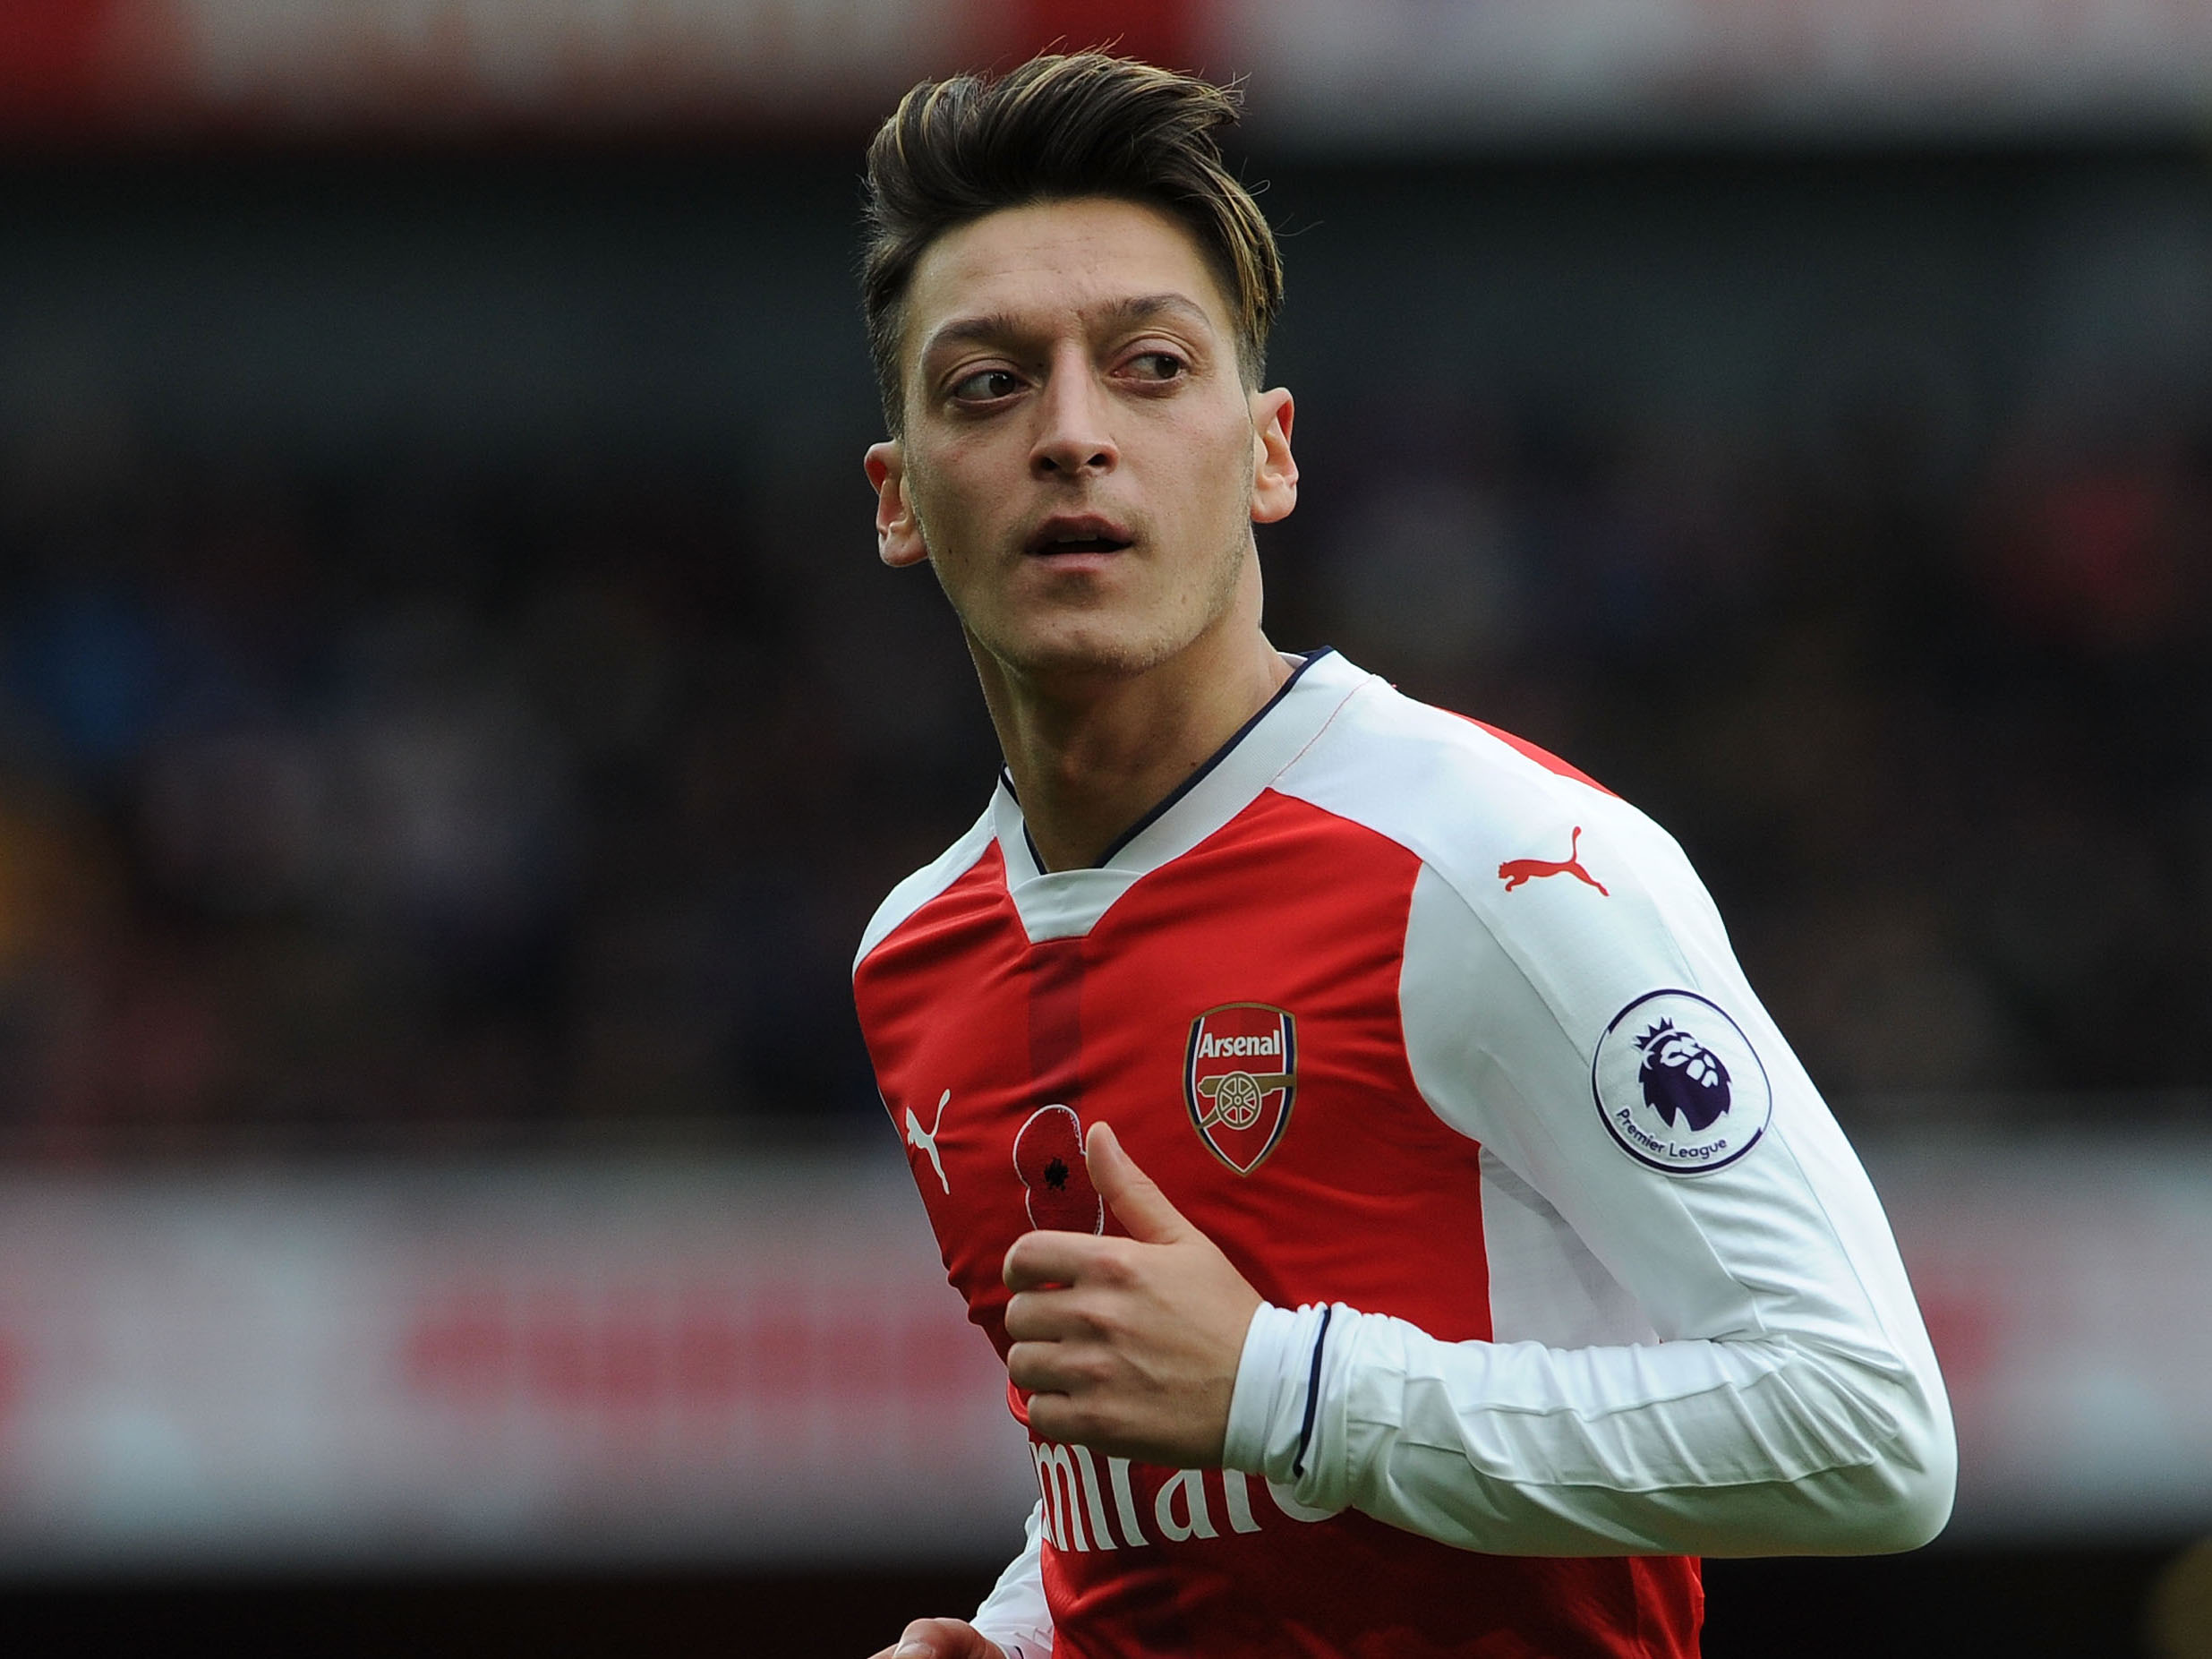 Unai Emery reveals what he said to Mesut Ozil in changing room after Arsenal win - Bóng Đá